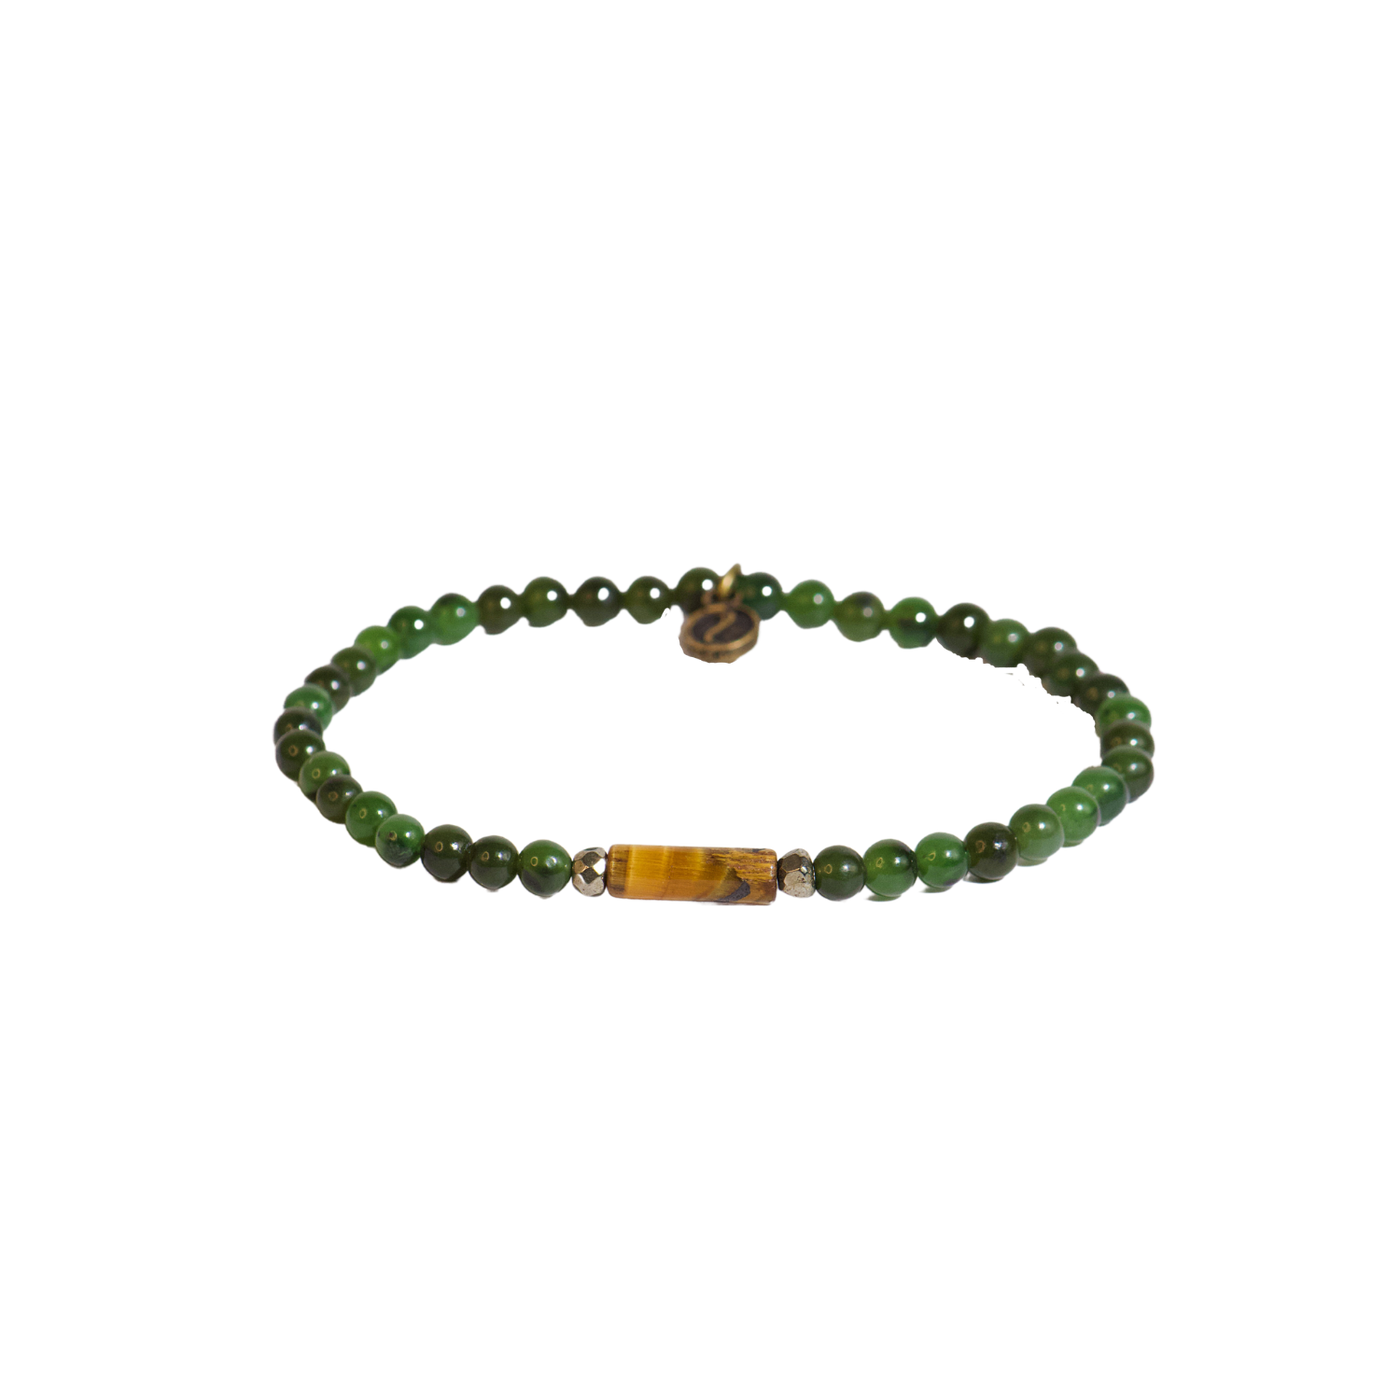 product view of genuine jade, tiger's eye and pyrite Financial Advisor Bracelet by Energy Muse